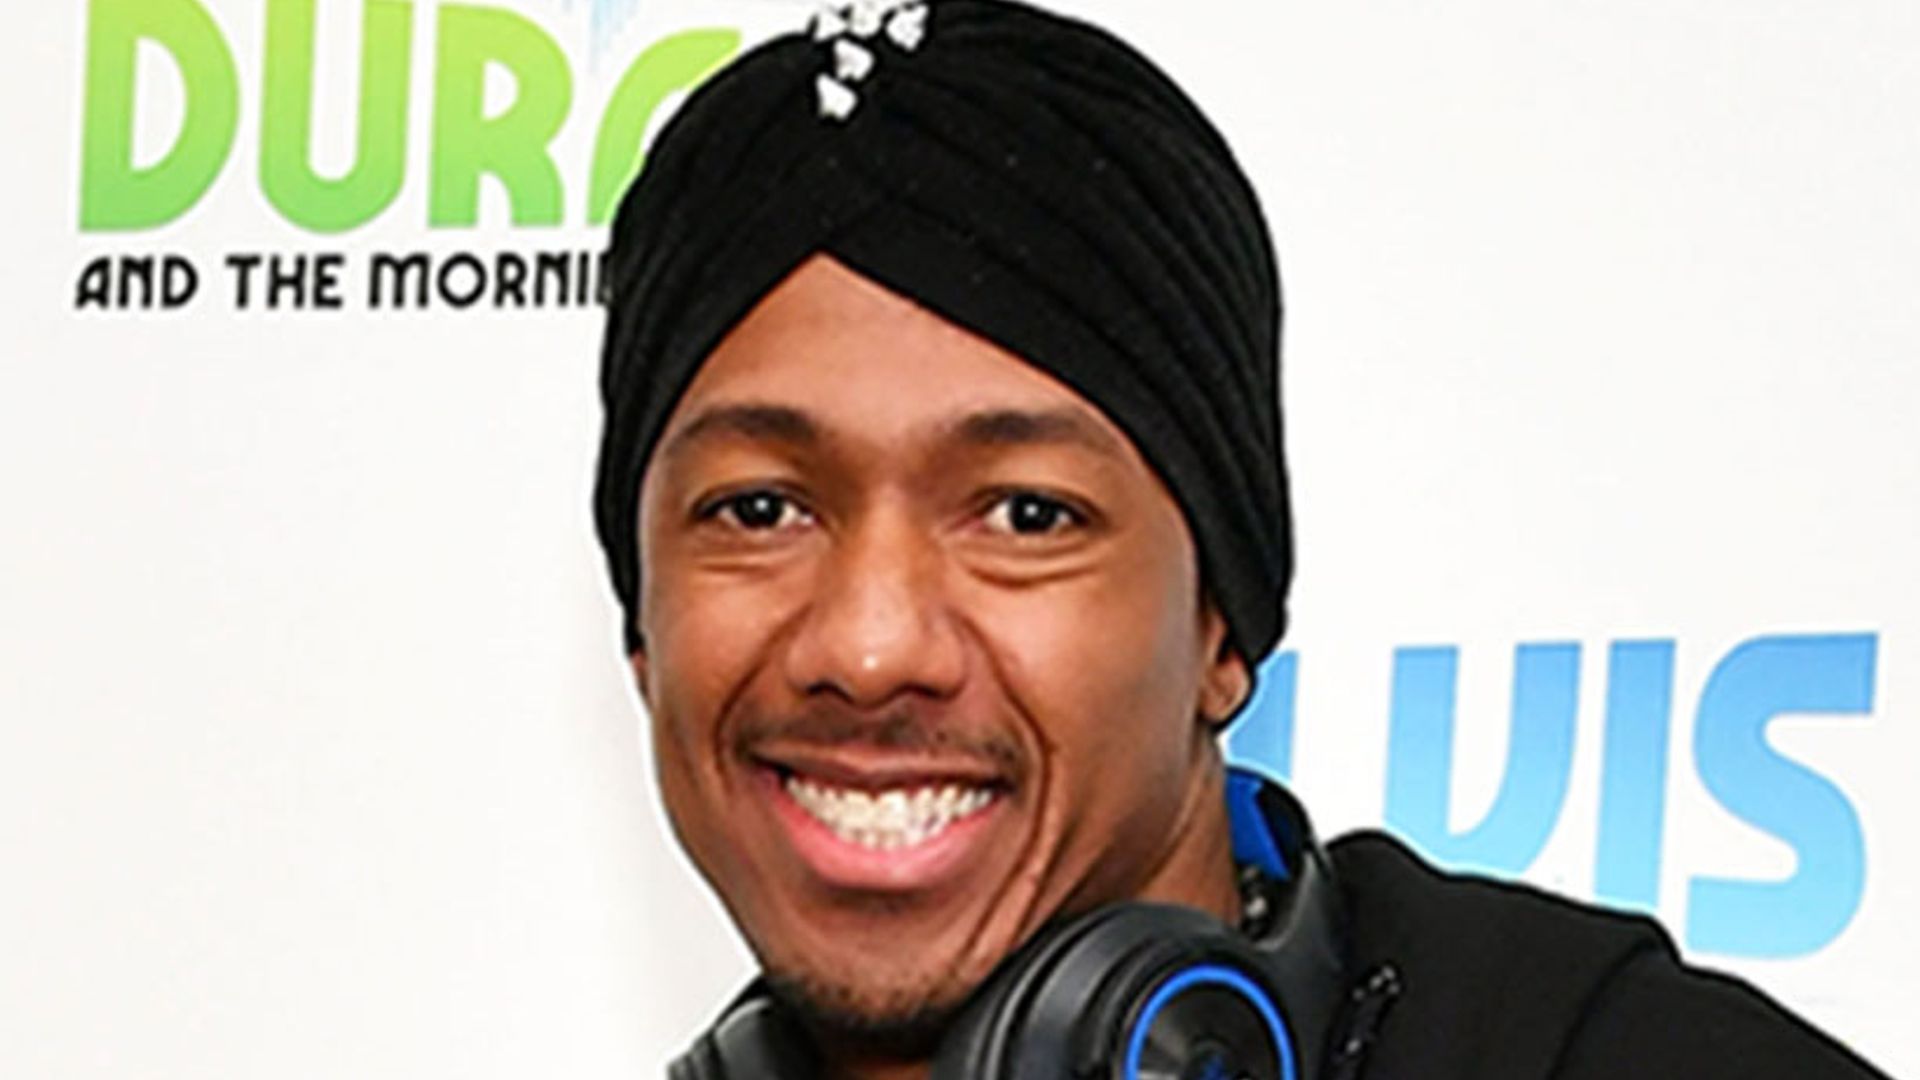 Mariah Carey's ex-husband Nick Cannon confirms he is having another child: 'I've got a baby on the way'